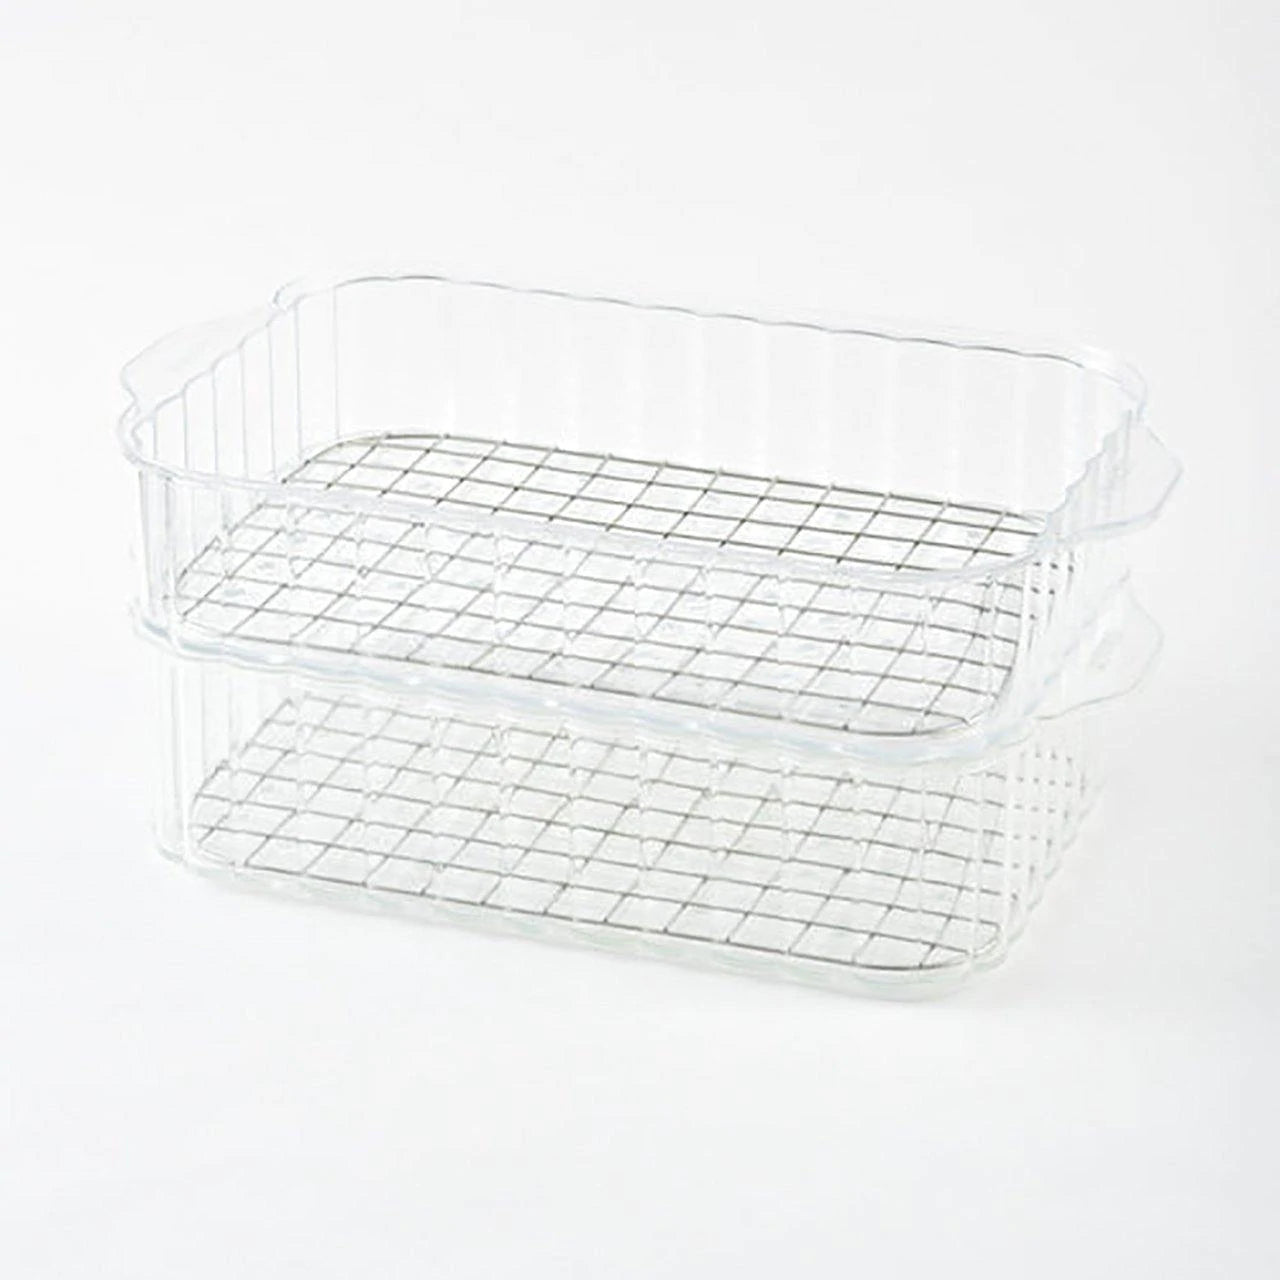 BRUNO Double Steamer Rack (for Compact Hot Plate)